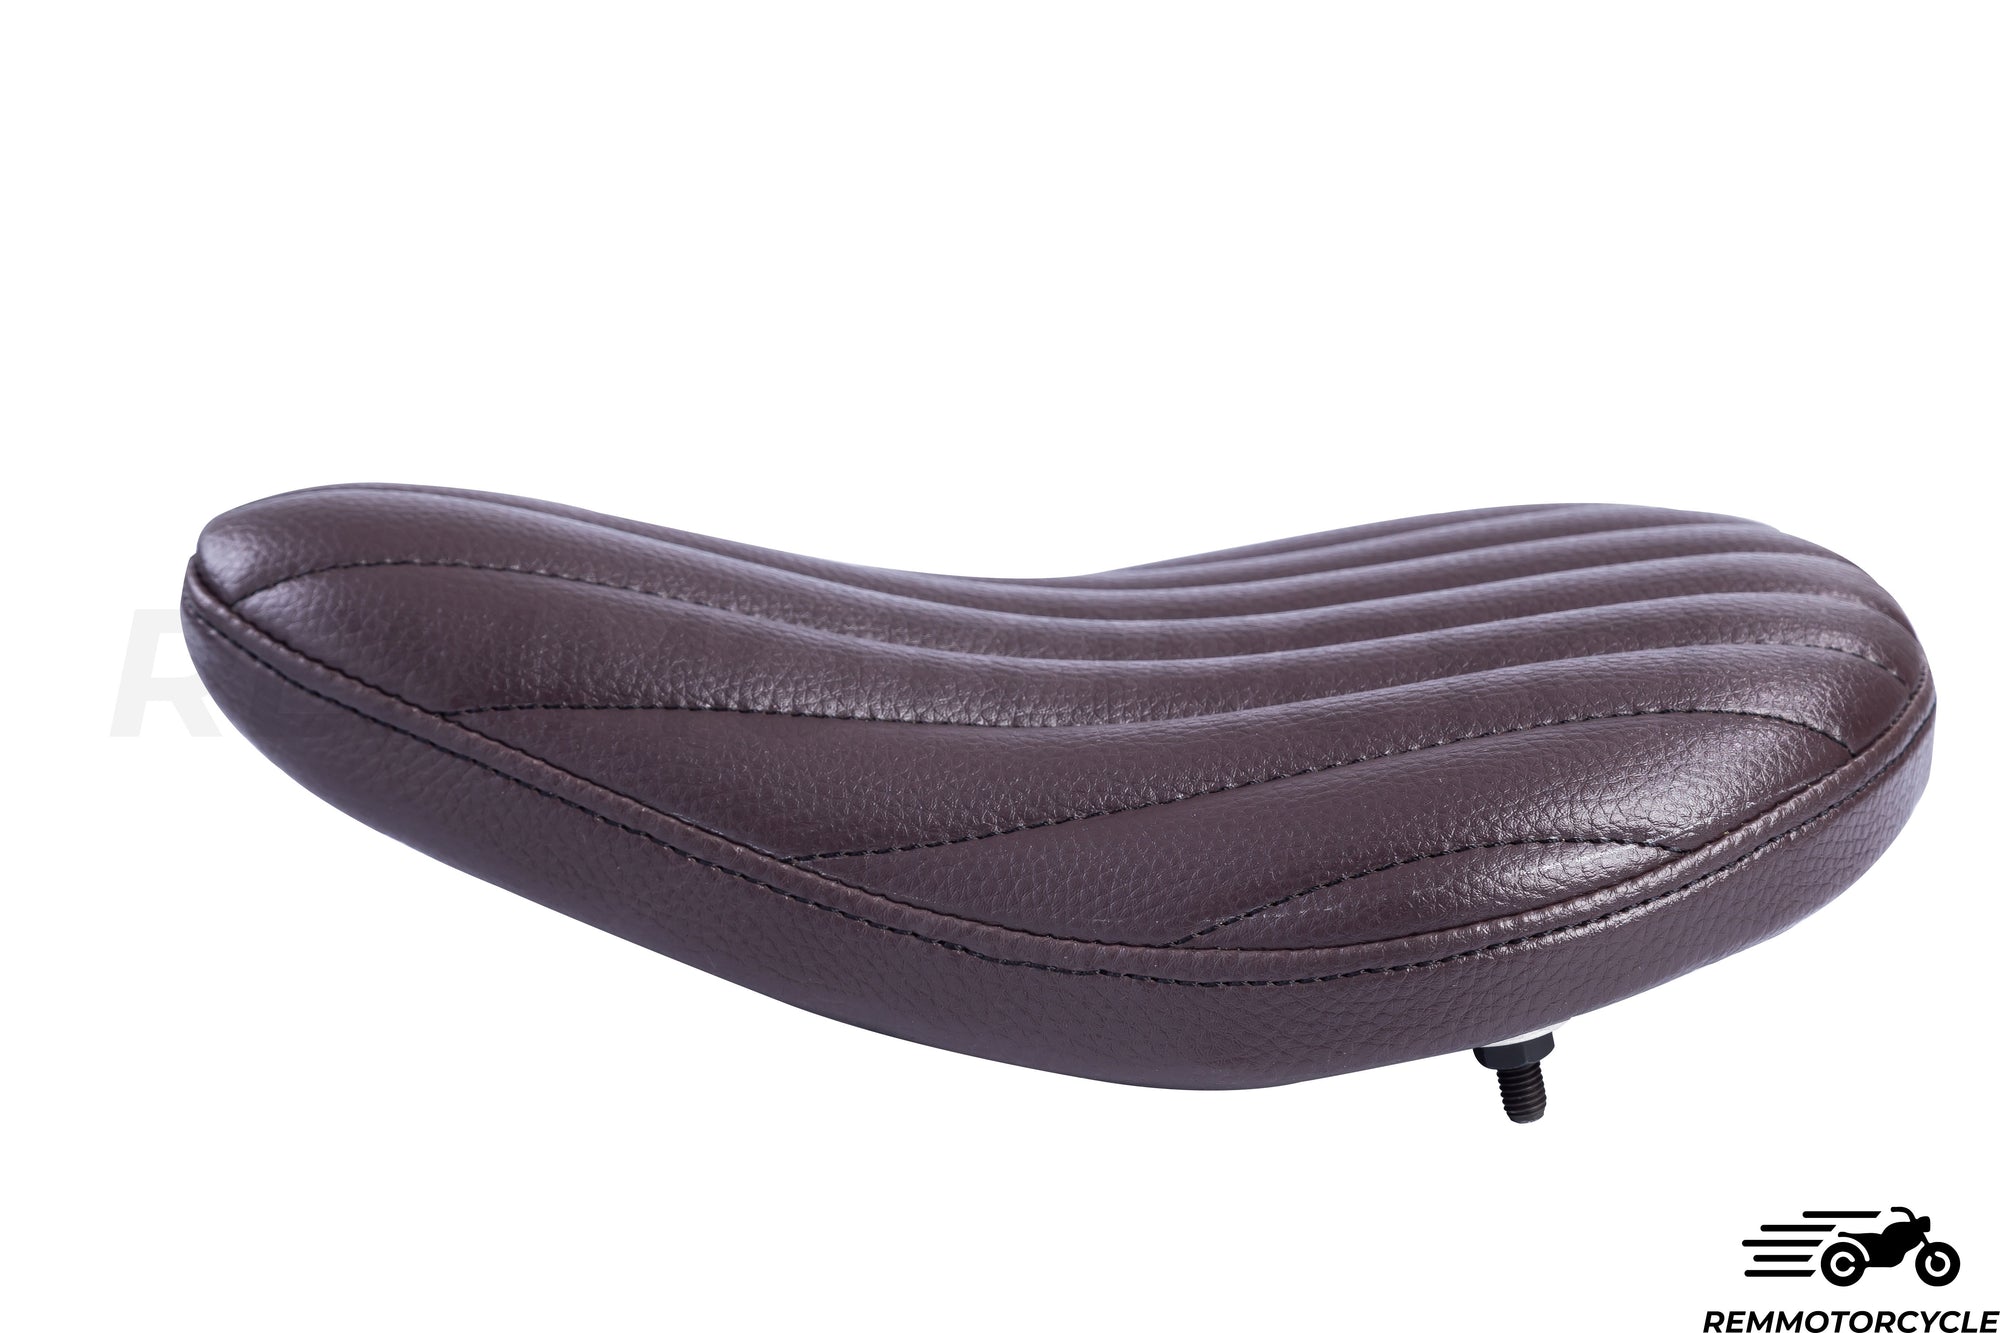 Selle Bobber Marron - Coutures verticales